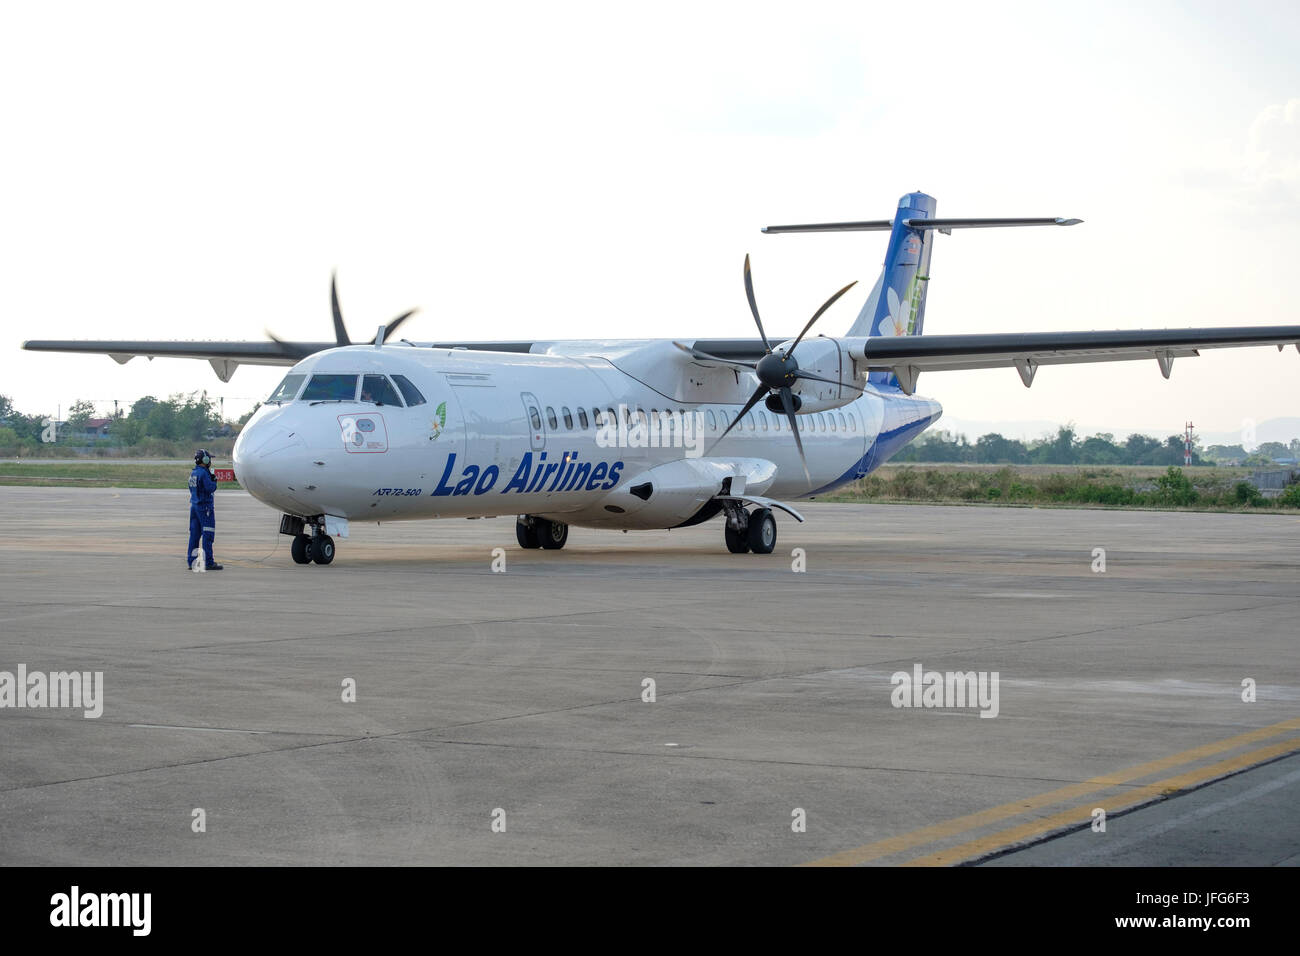 Lao Airlines propeller airplane on airport tarmac Stock Photo